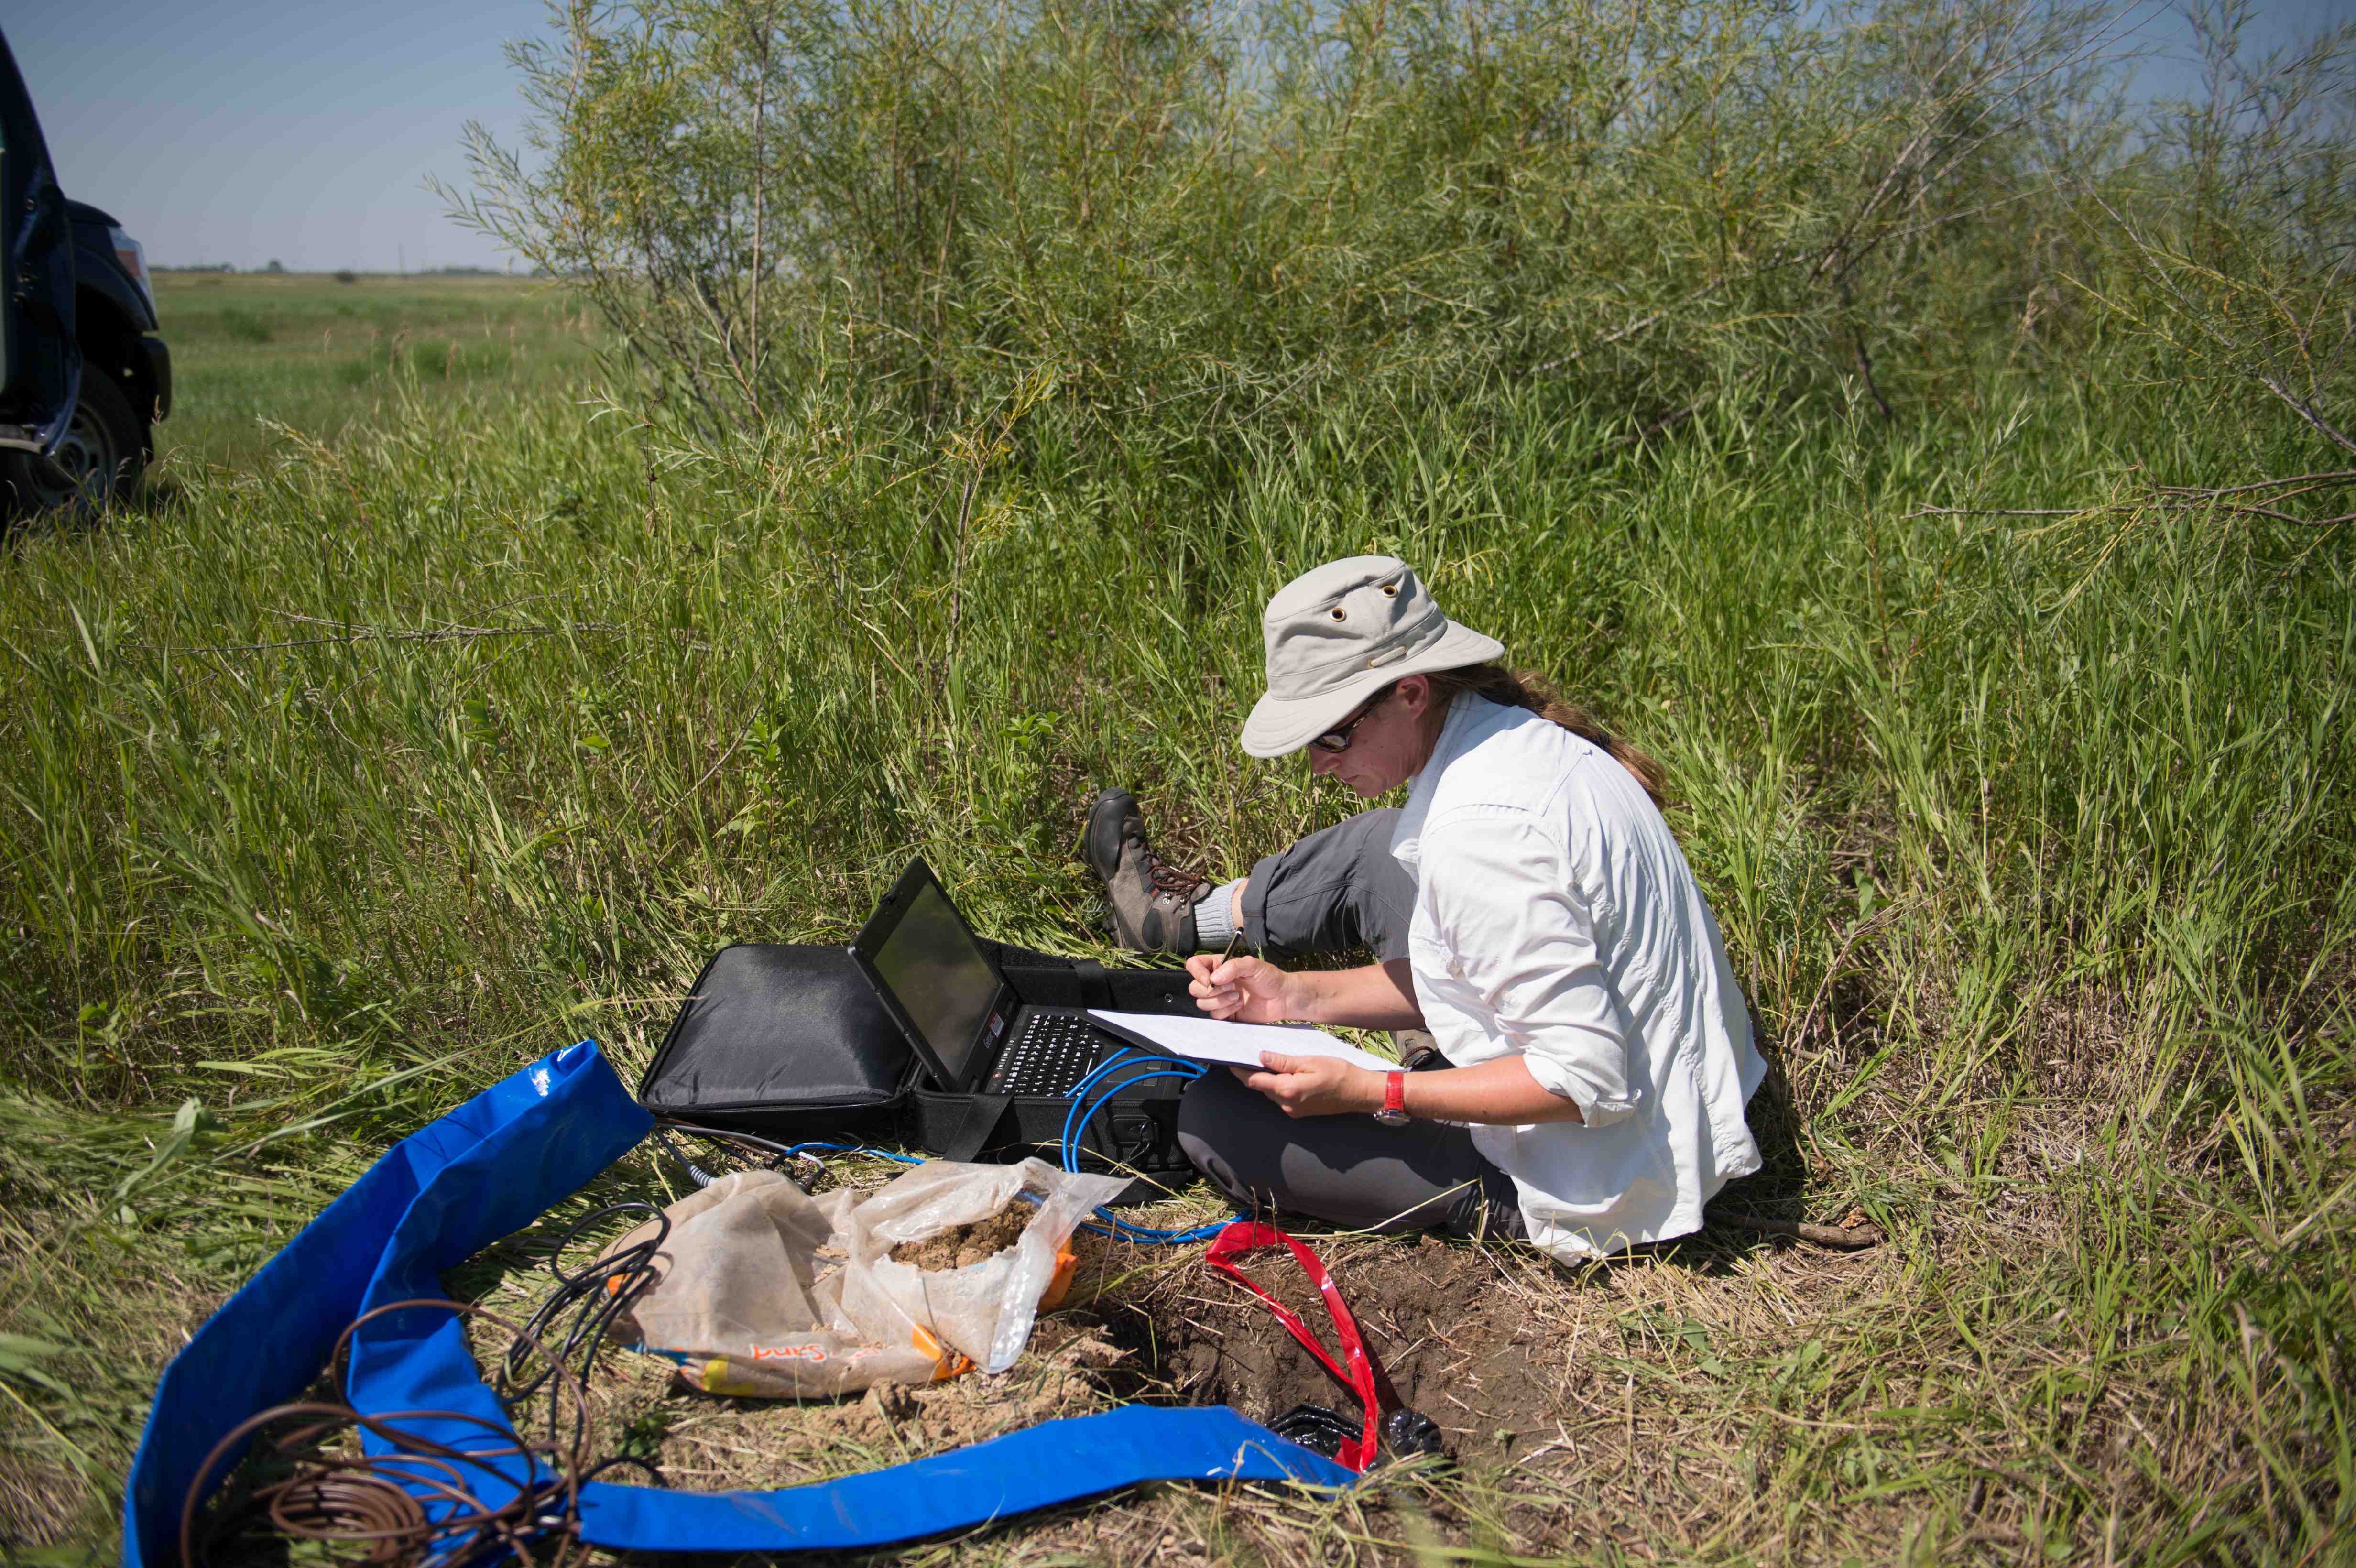 Setting up a seismometer to monitor CO2 injection at the Weyburn Field, Saskatchewan Canada